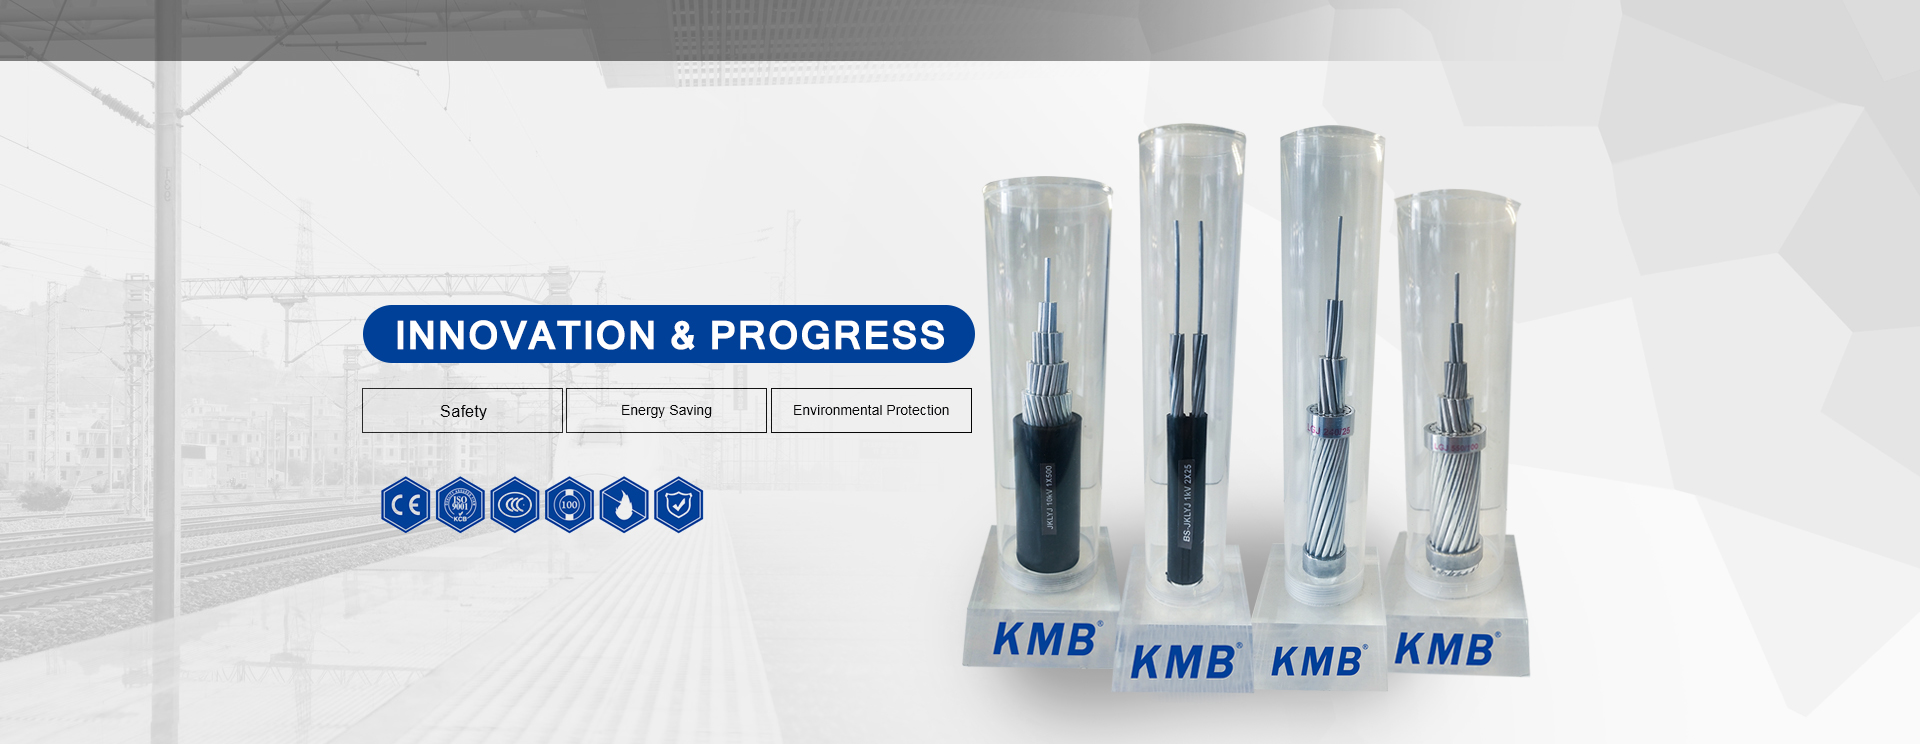 KMB-Wire and Cable-Jiangxi Tuocheng Wire & Cable Manufacturing Co.,Ltd.
